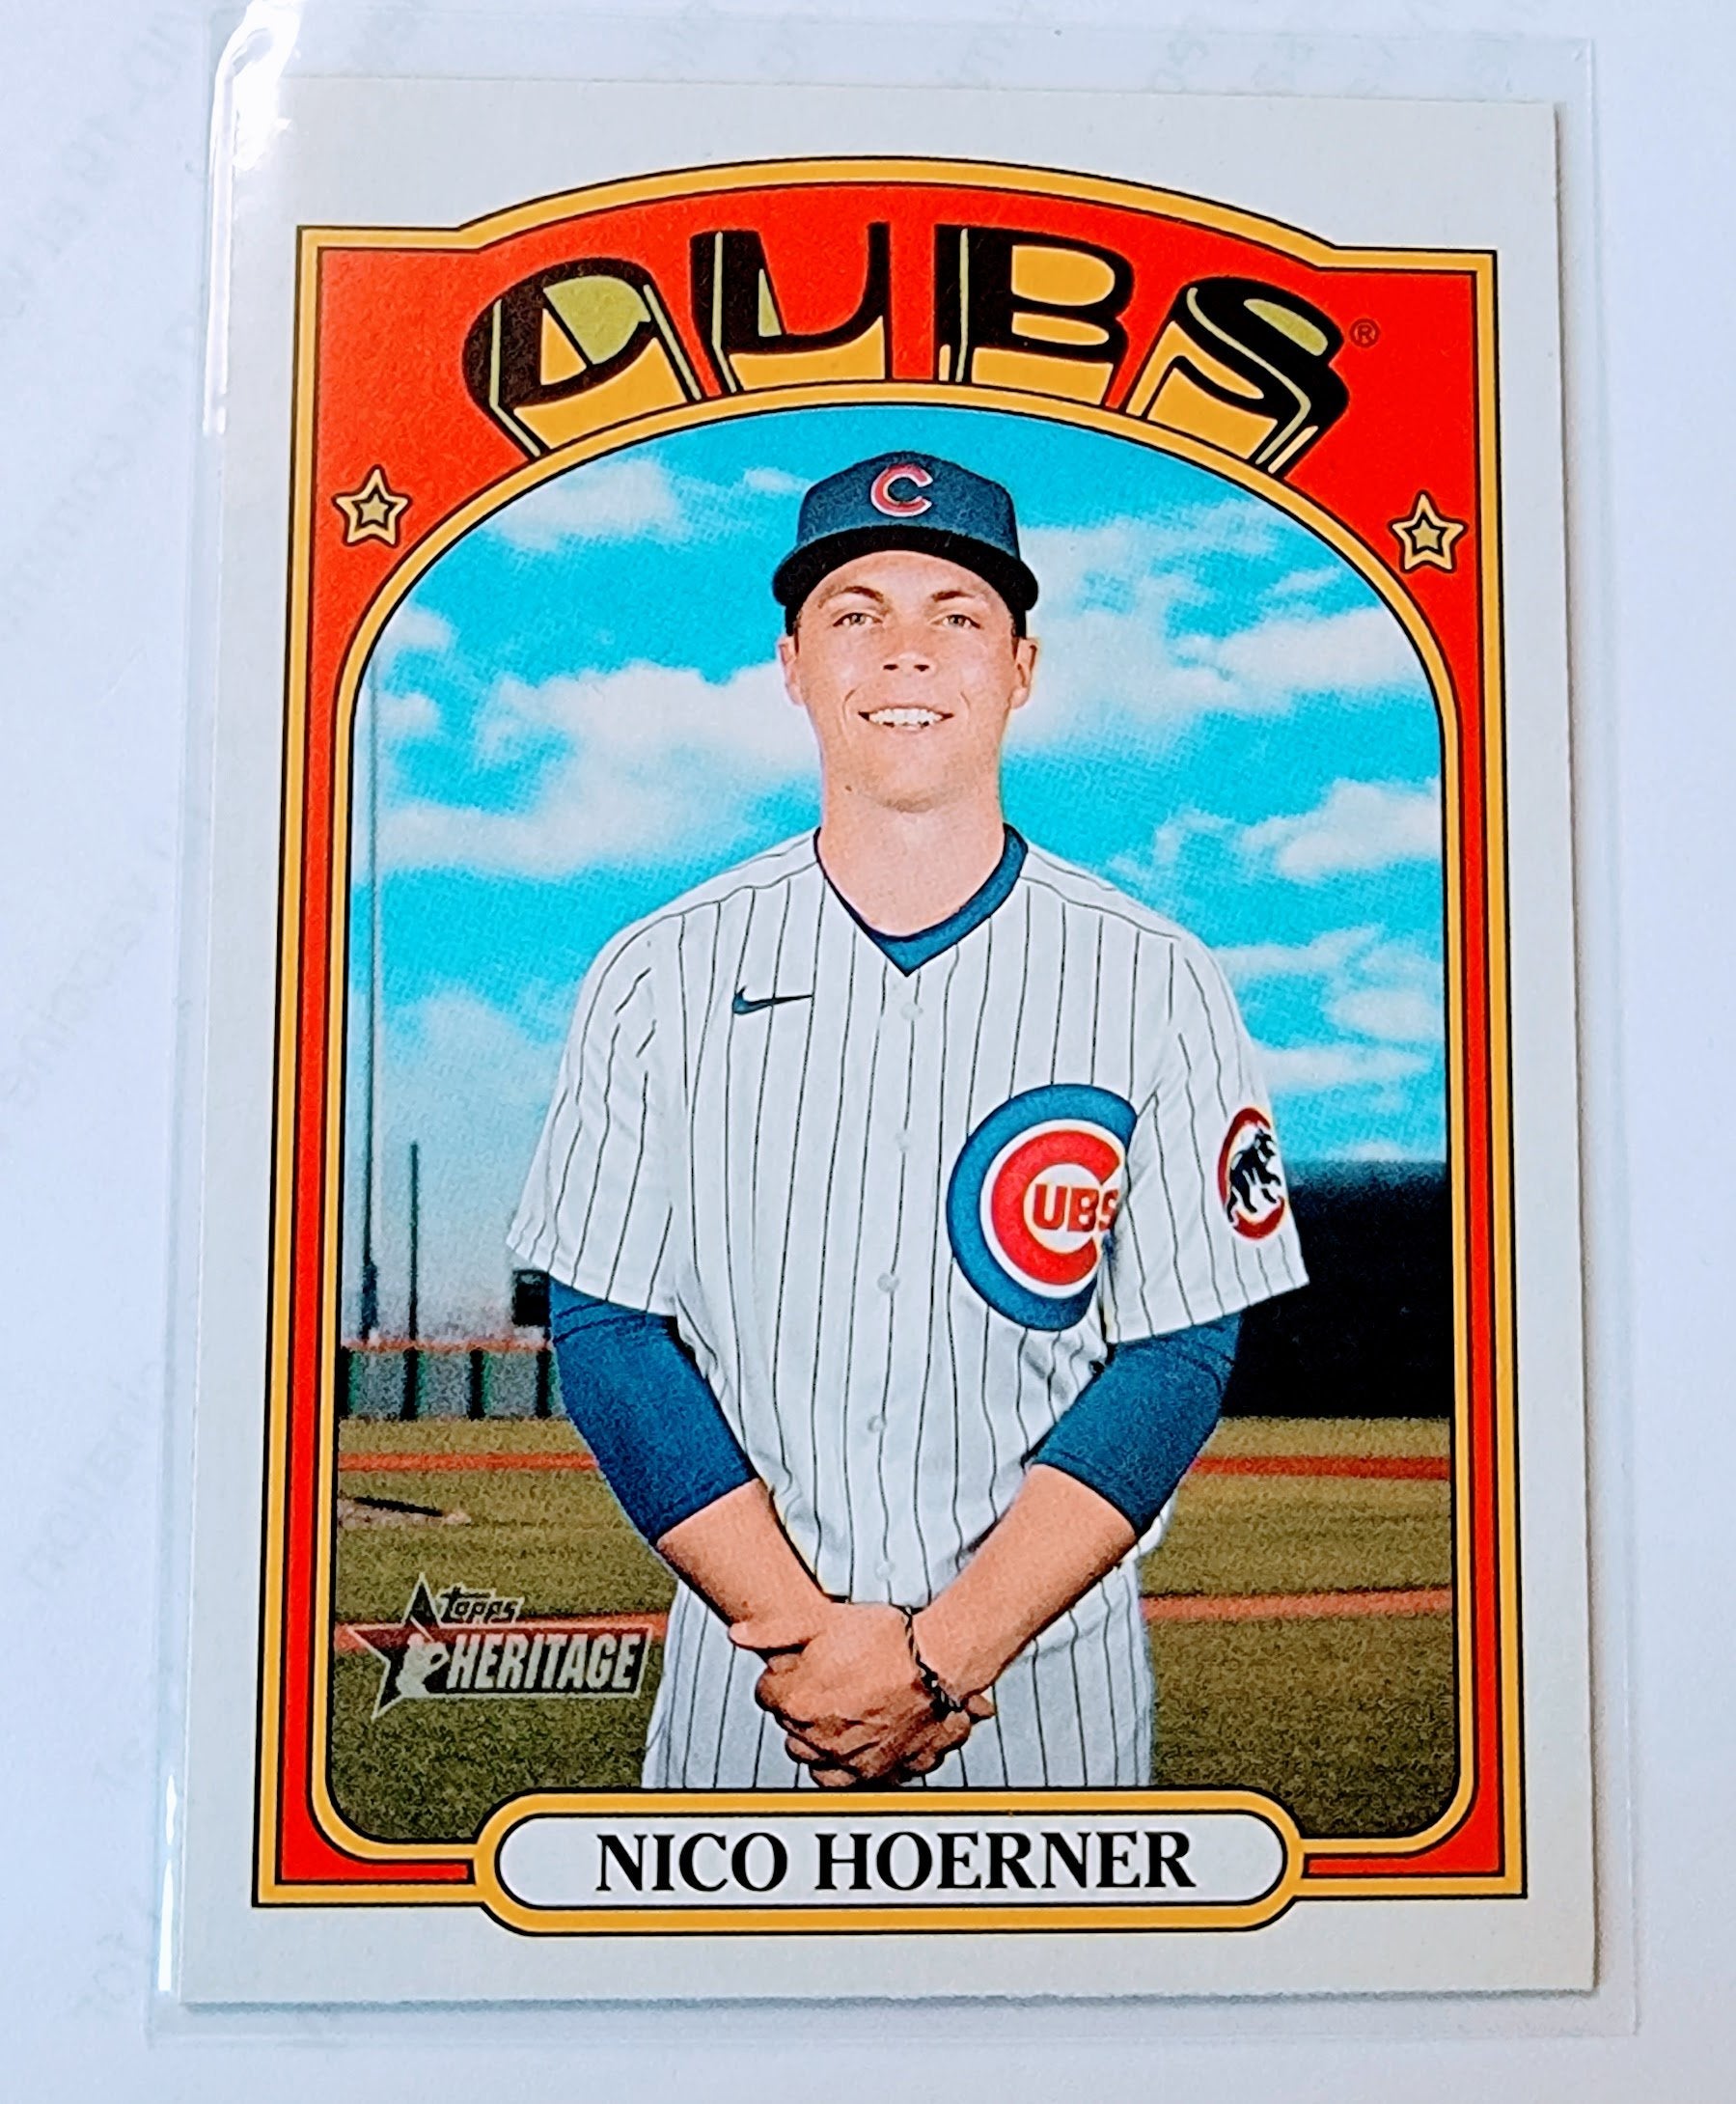 2021 Topps Heritage Nico Hoerner Short Print Baseball Trading Card MCSC1 simple Xclusive Collectibles   